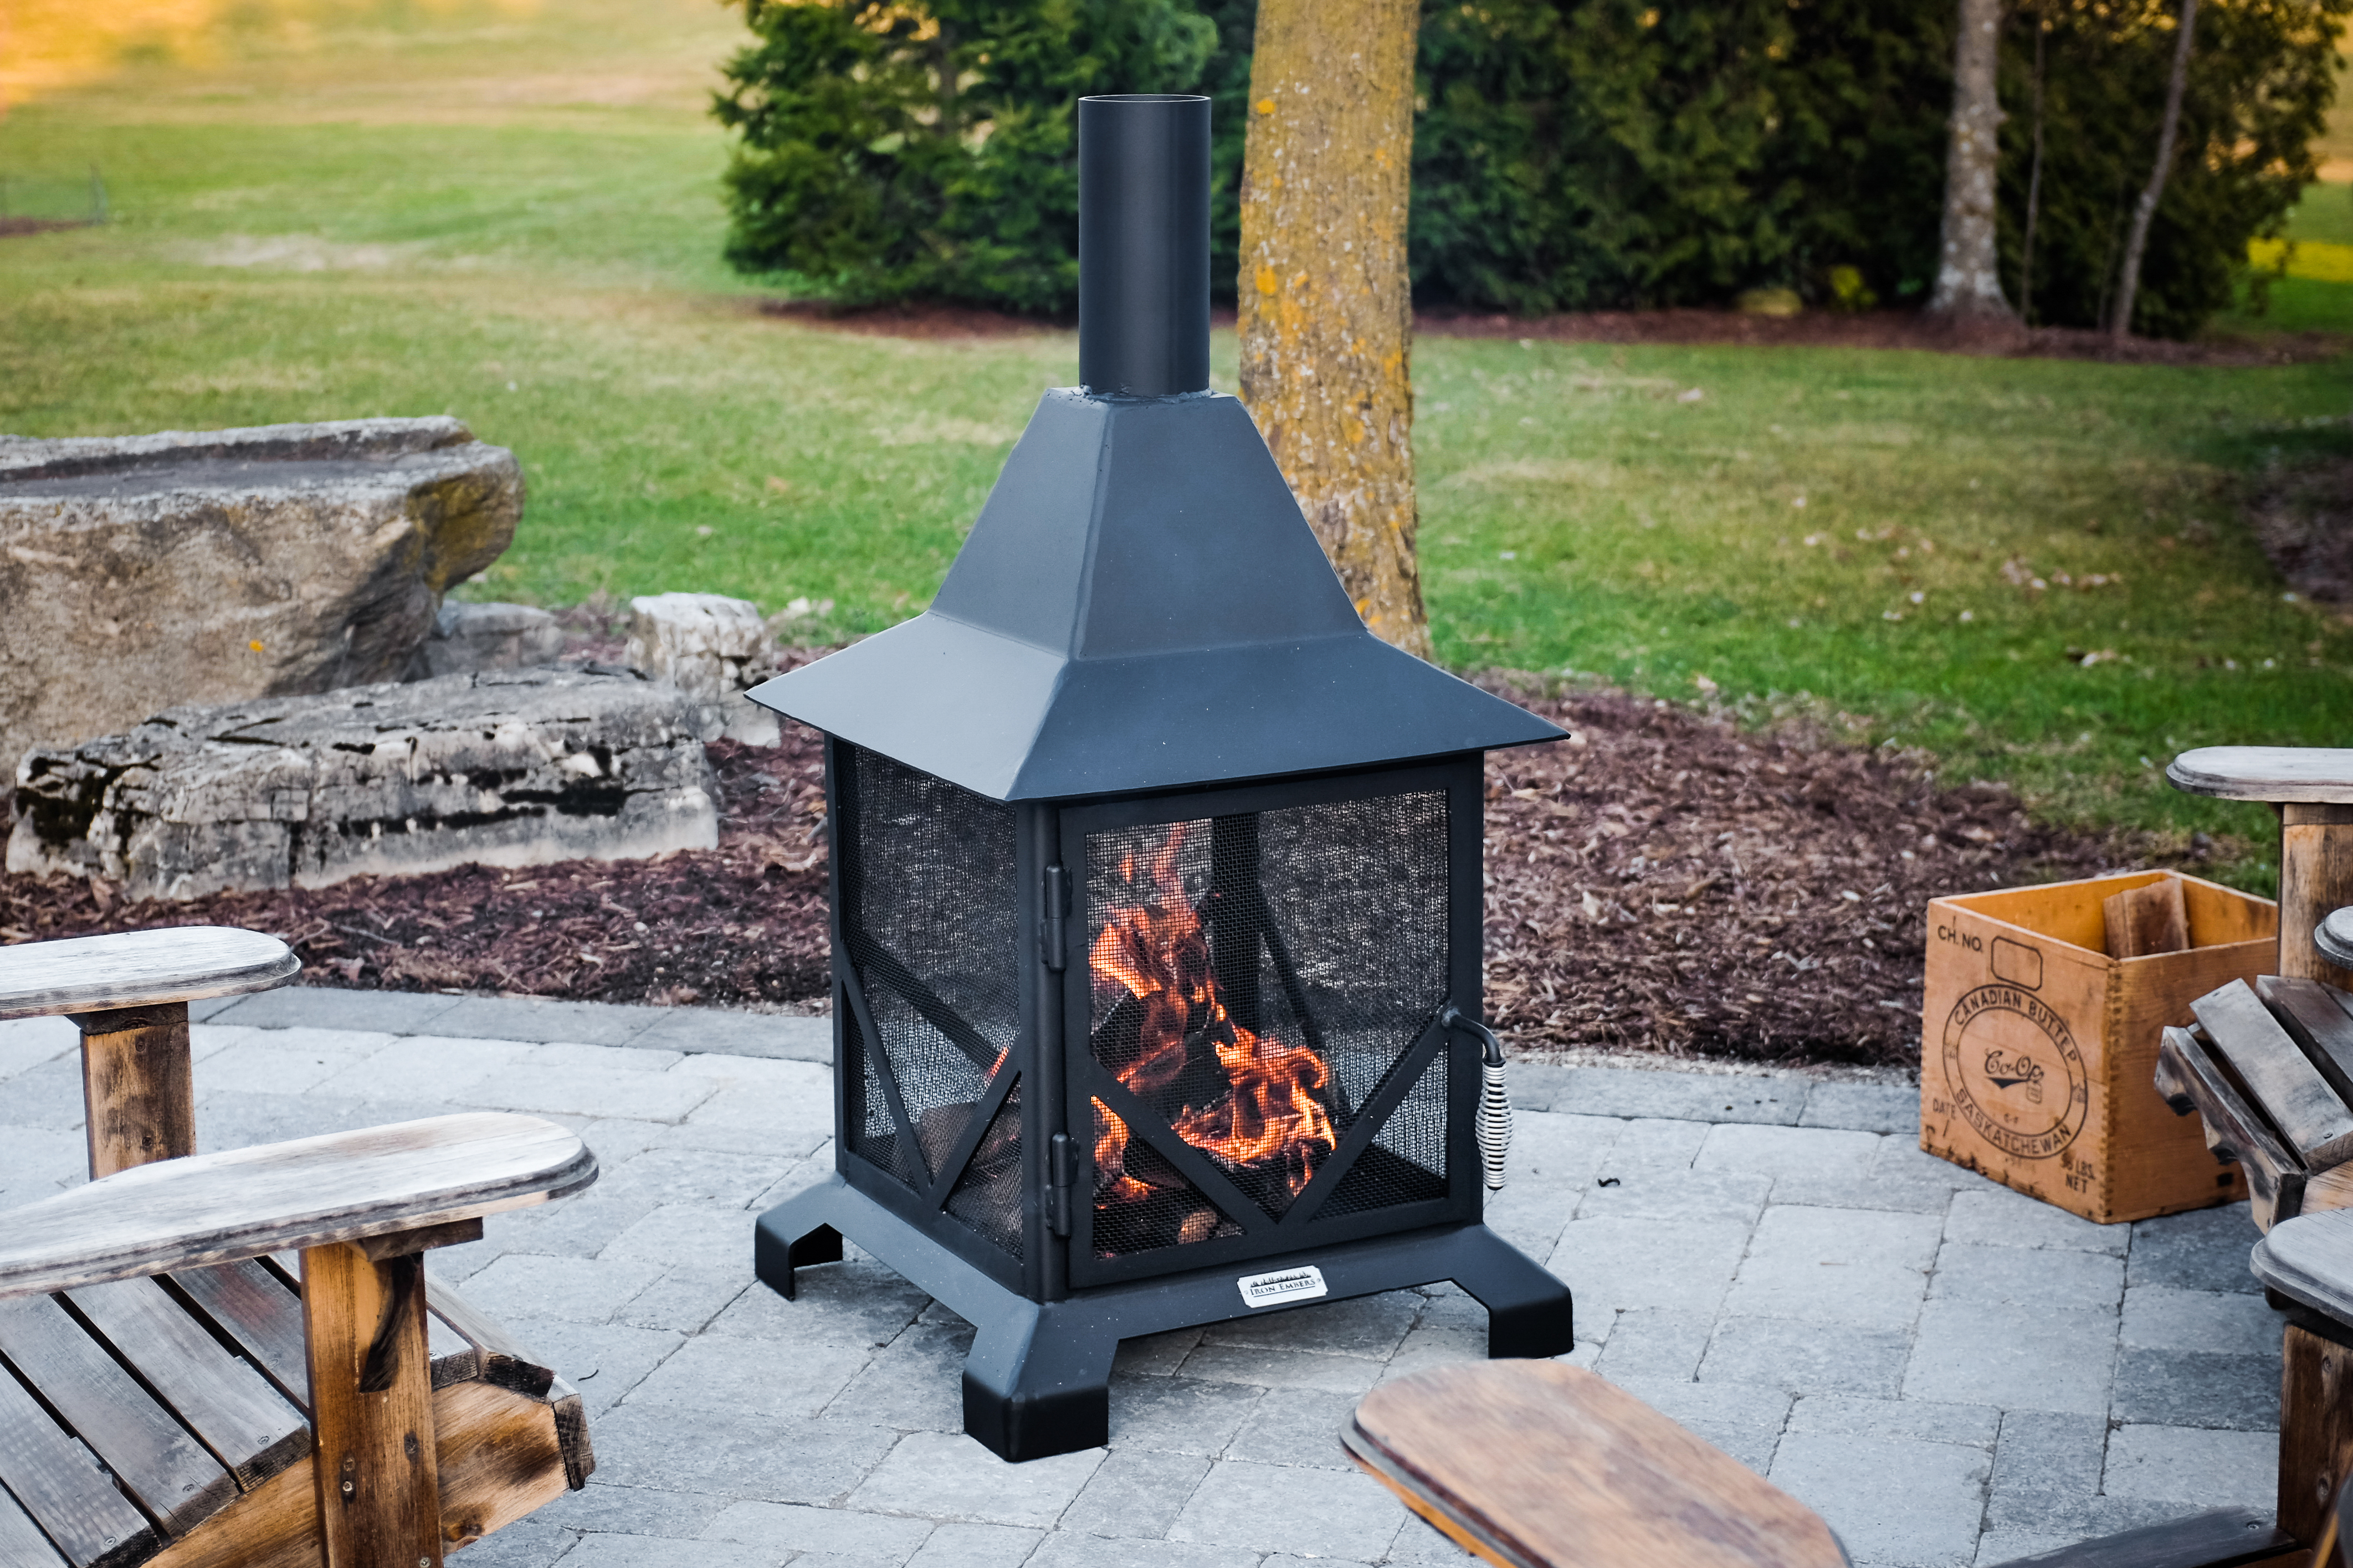 Large Fire Place Grill Garden Grill Grill Chimney Garden Fireplace Outdoor Fireplace Black High Pyramid